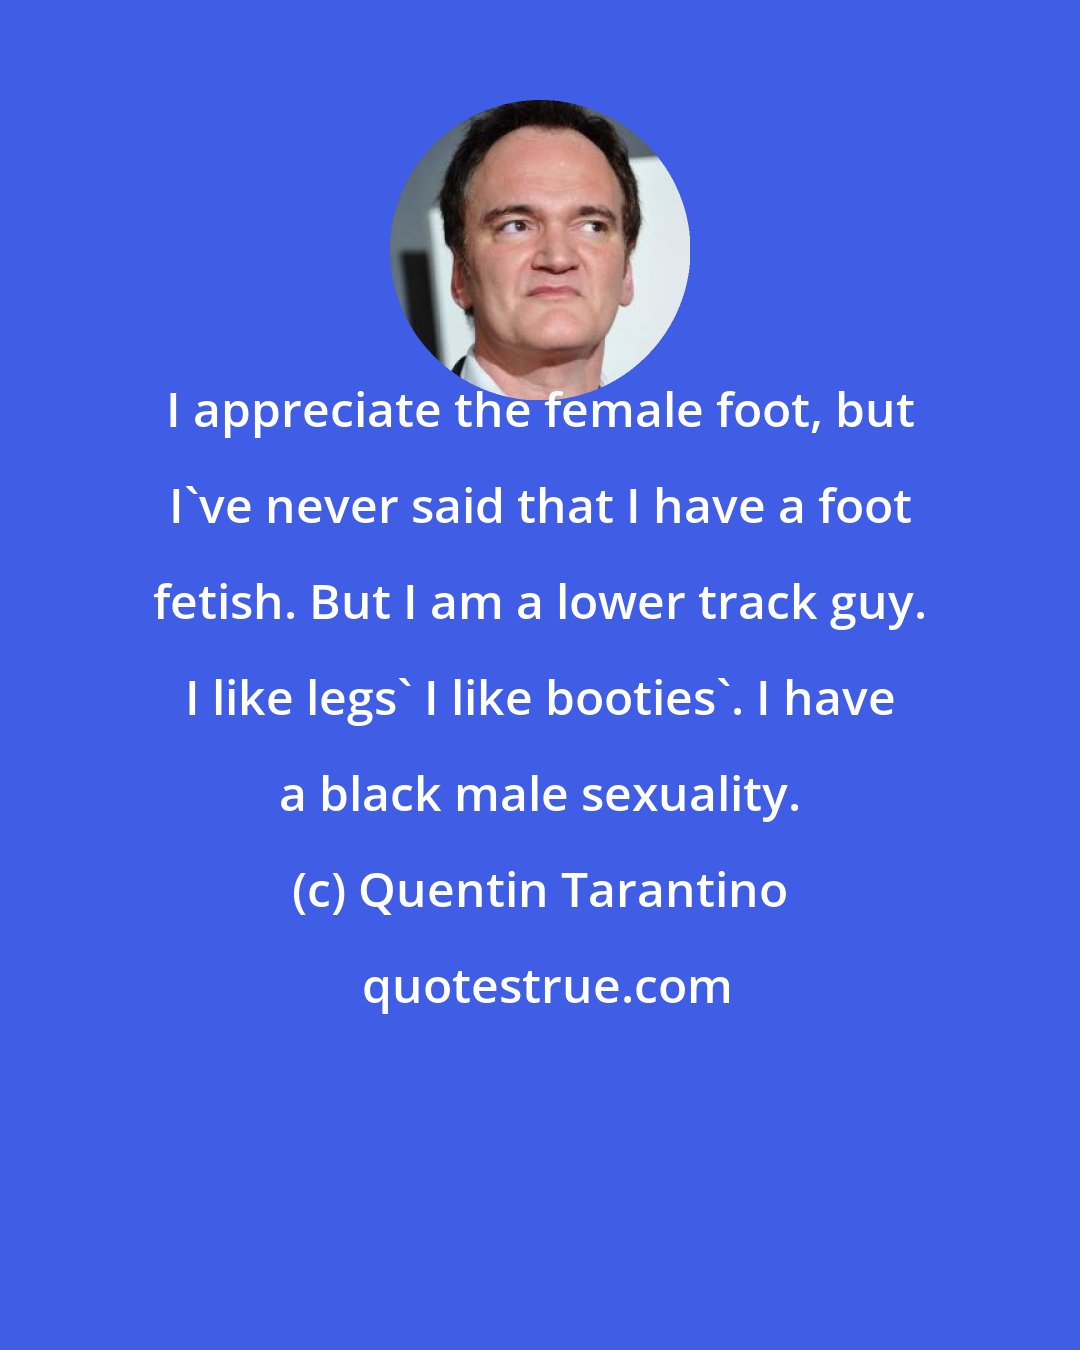 Quentin Tarantino: I appreciate the female foot, but I've never said that I have a foot fetish. But I am a lower track guy. I like legs' I like booties'. I have a black male sexuality.